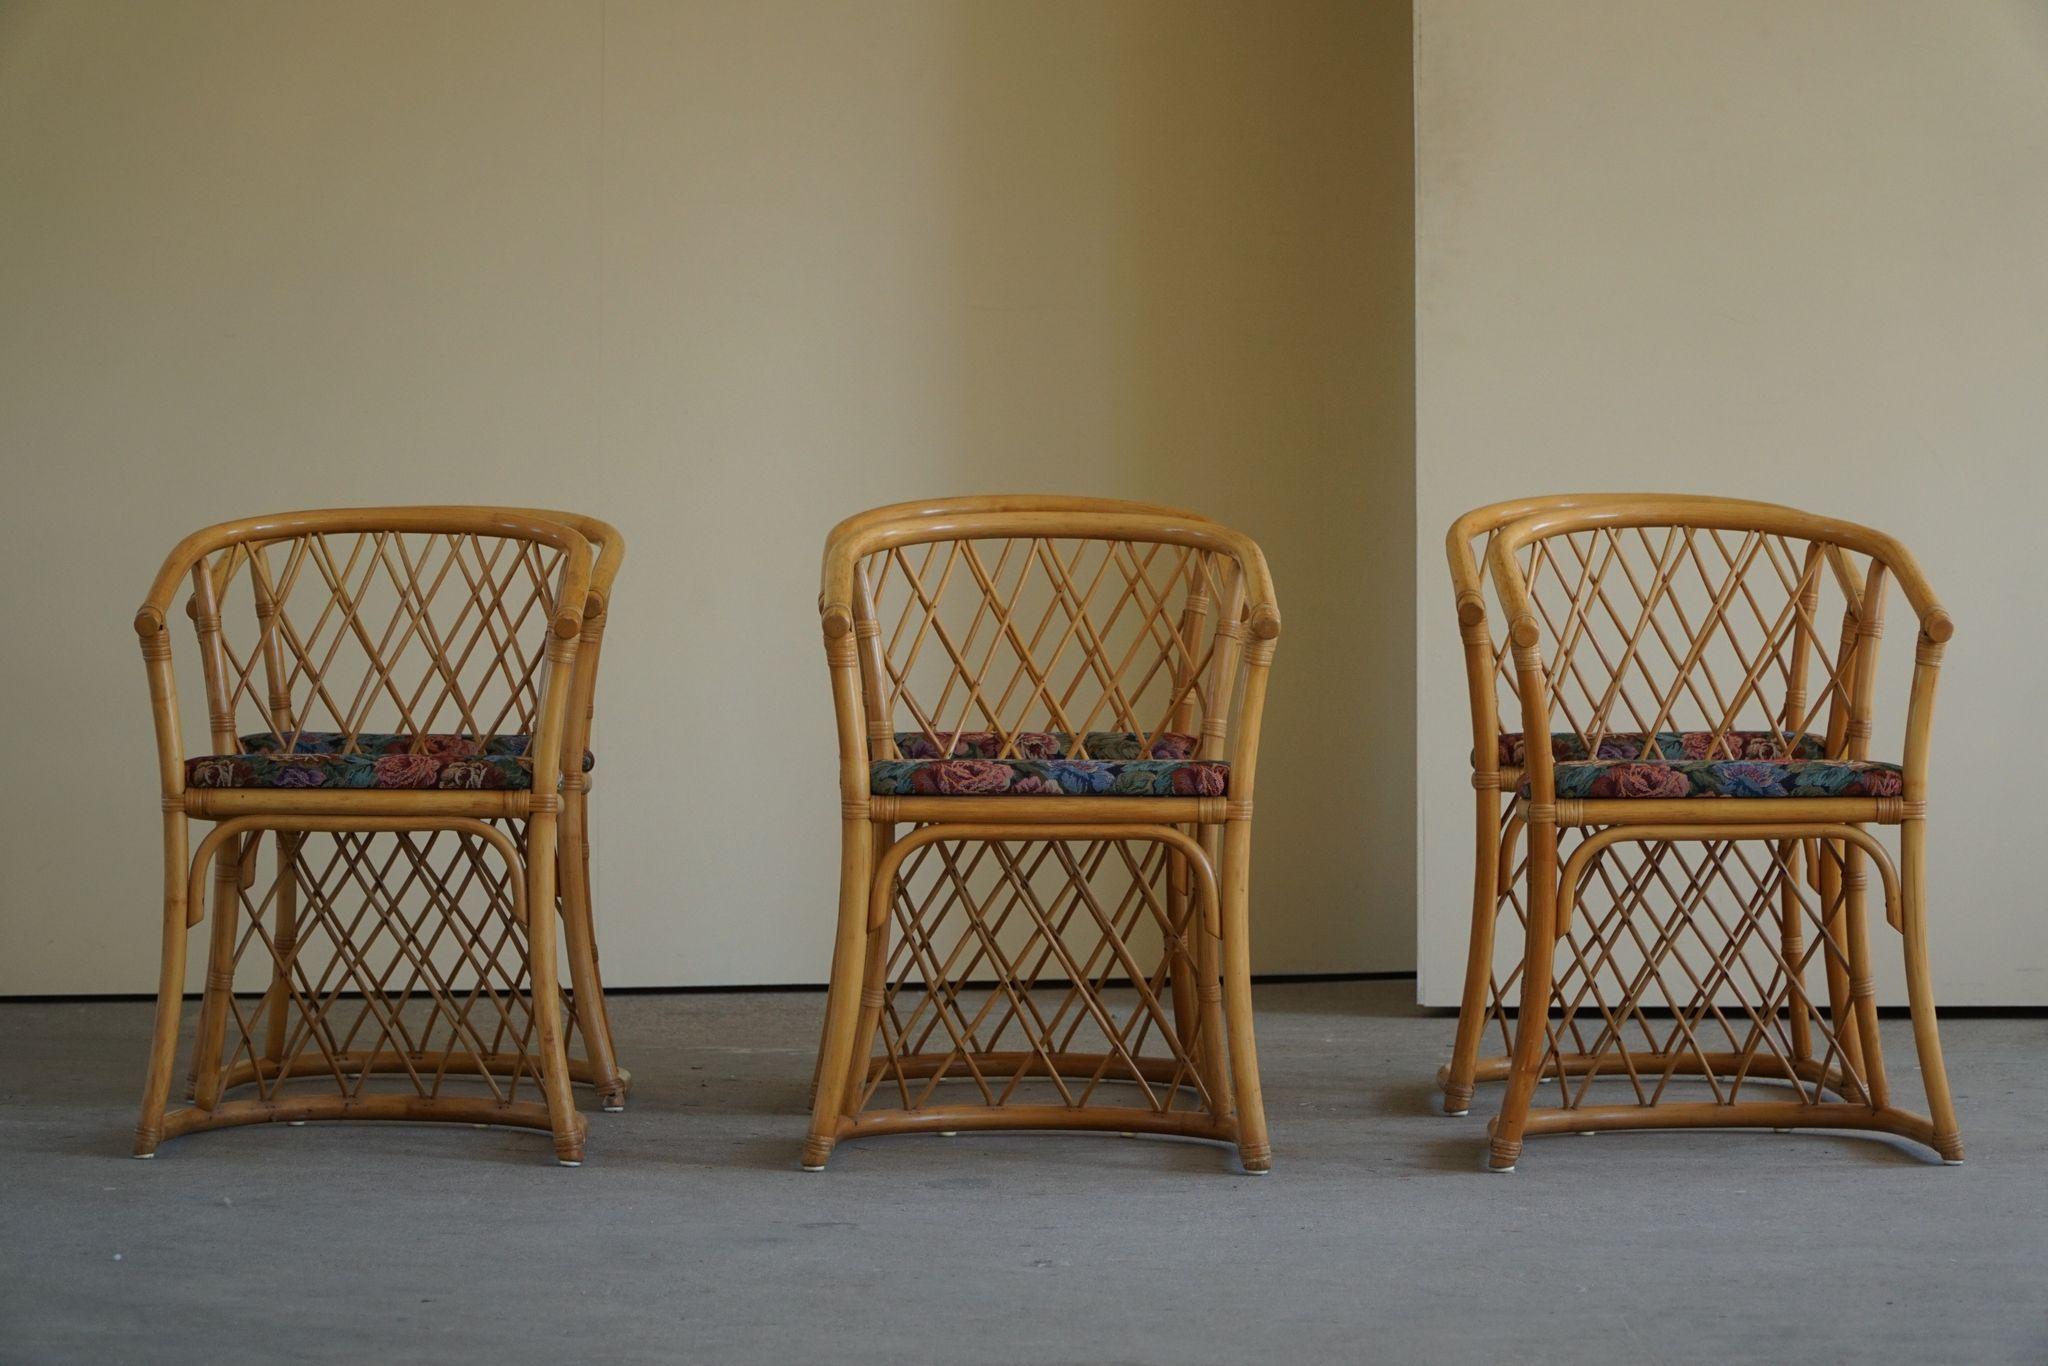 Fabric Set of 6 Sculptural Vintage Bamboo Dining Chairs, Danish Modern, Made in 1960s For Sale